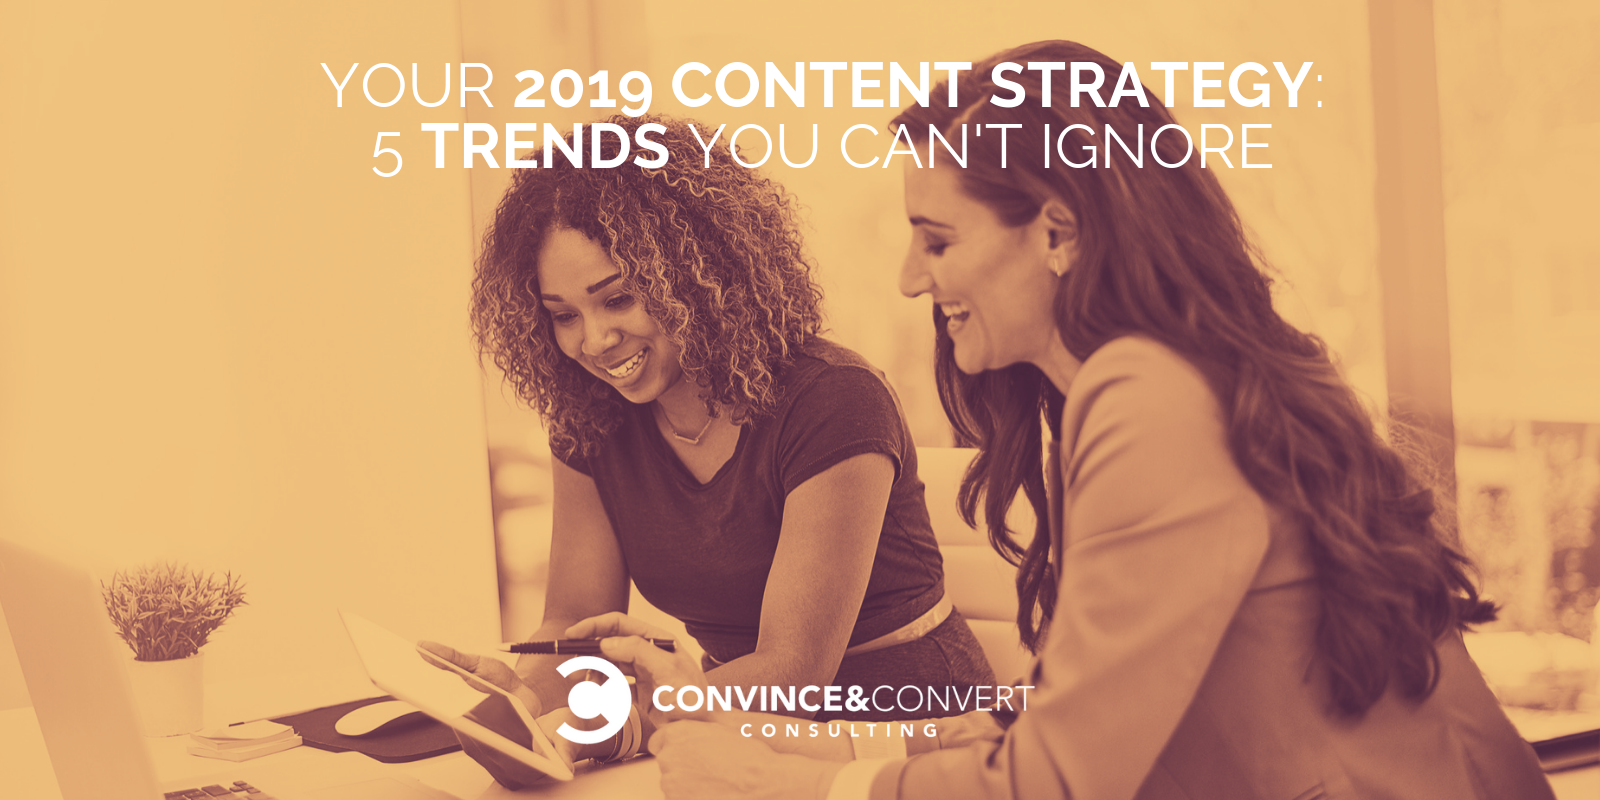 Your 2019 Content Strategy: 5 Trends You Can’t Ignore